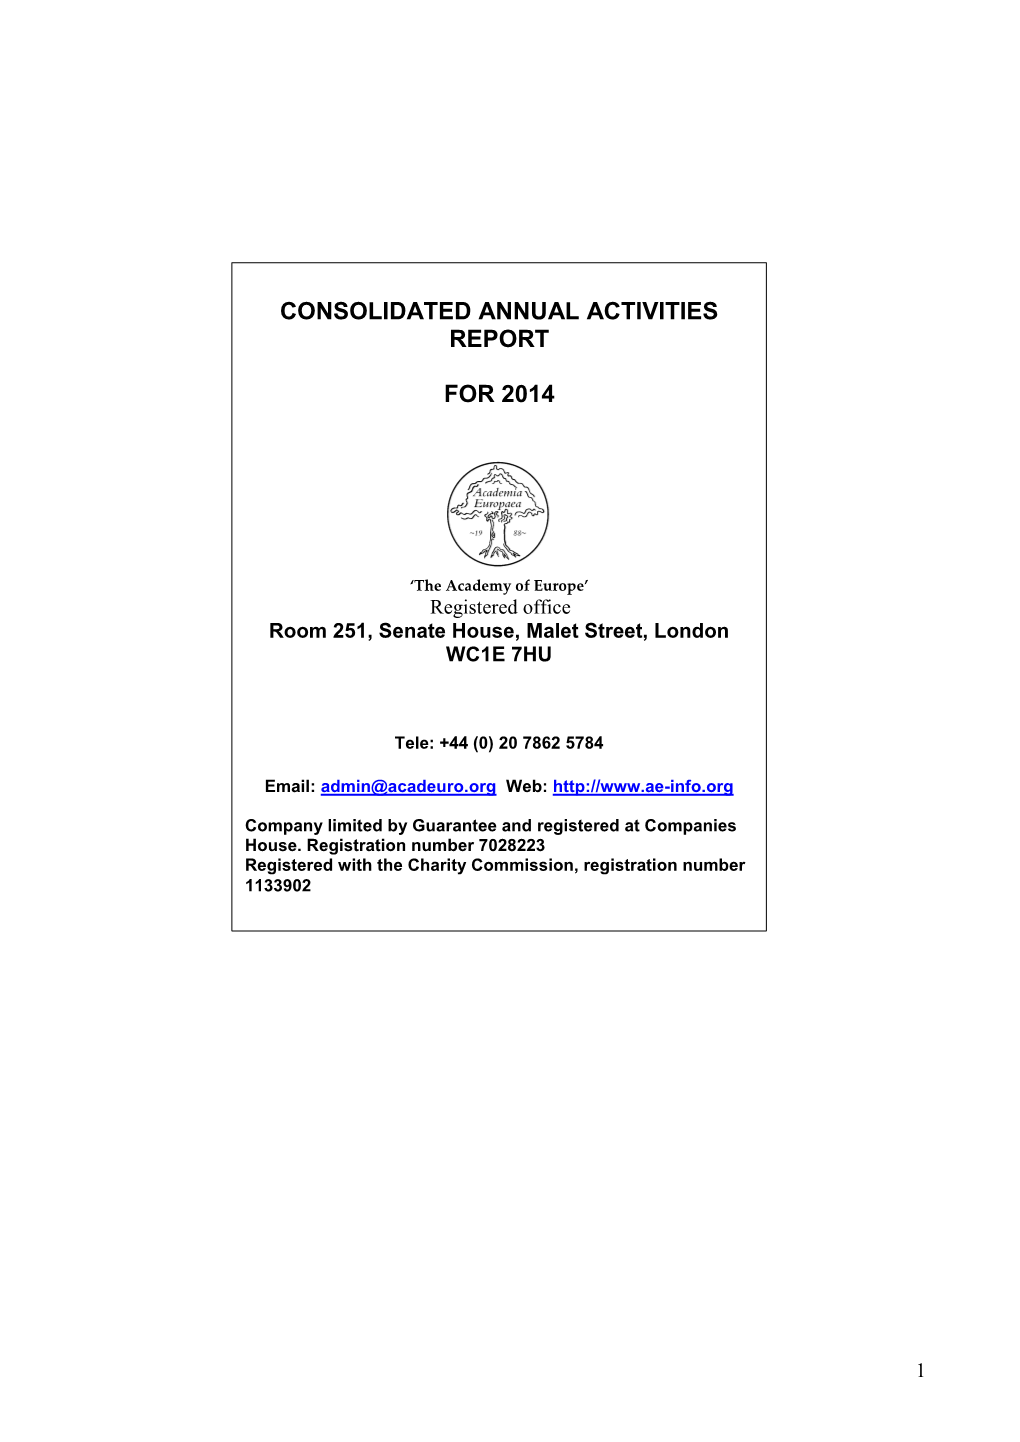 Consolidated Annual Activities Report for 2014